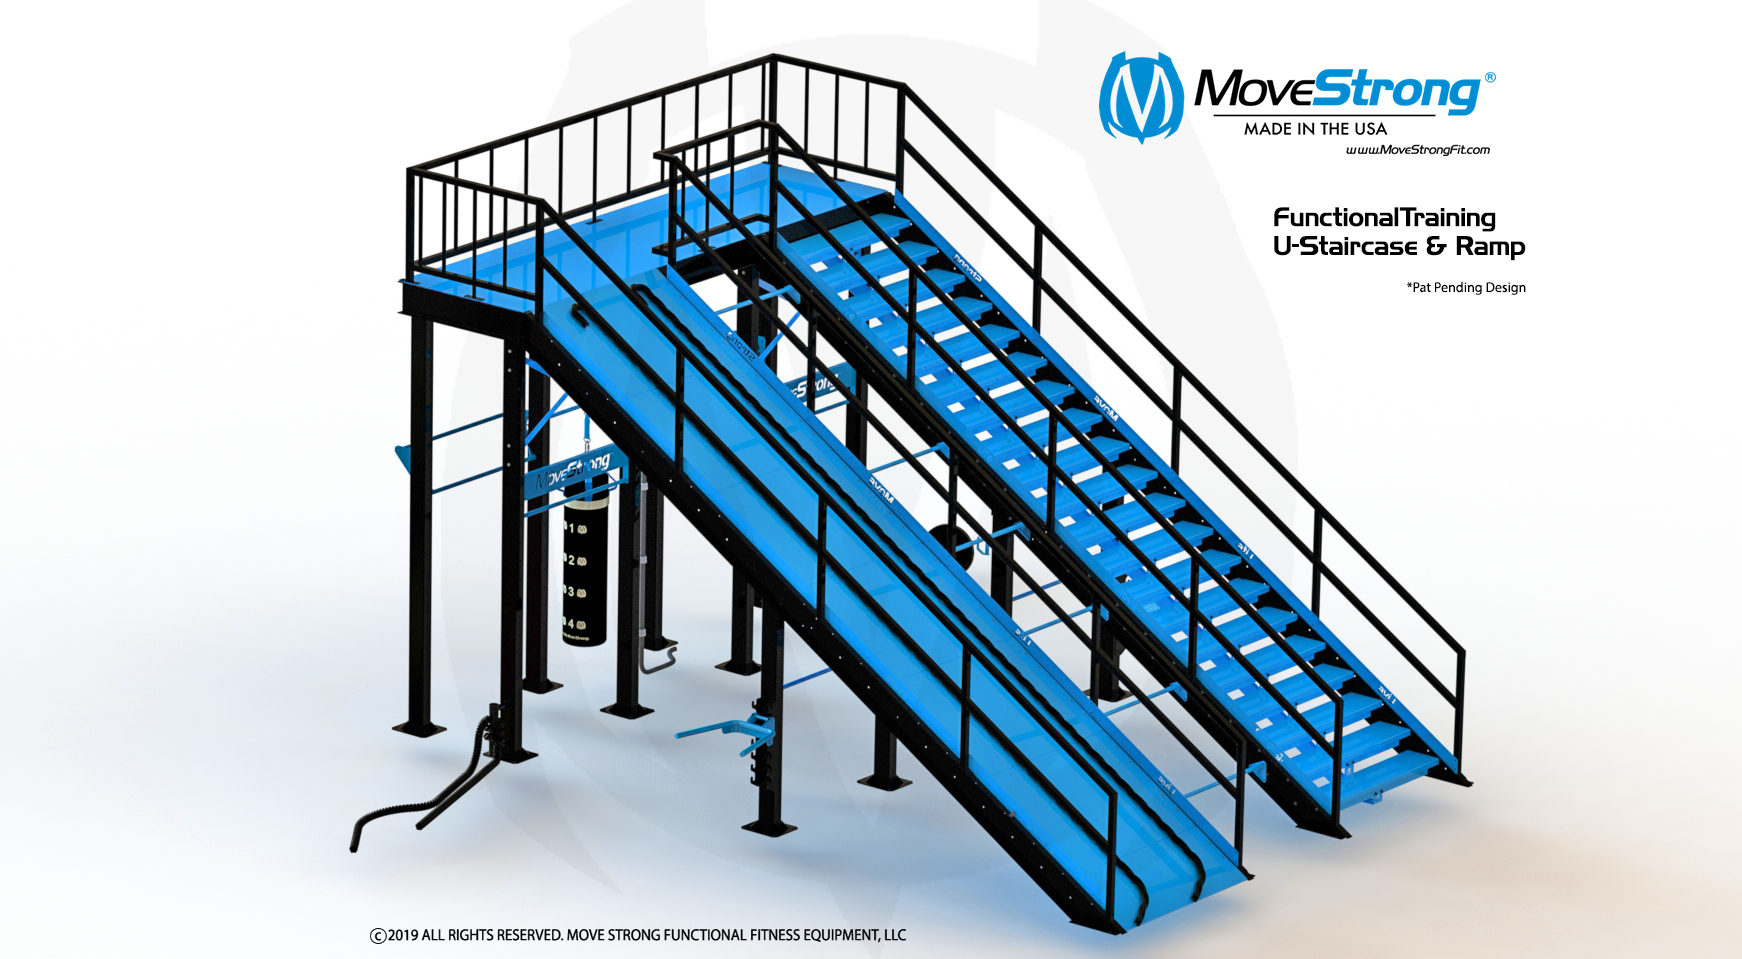 Functional Training Station with Stairs and Ramp (Copy) (Copy) (Copy) (Copy)